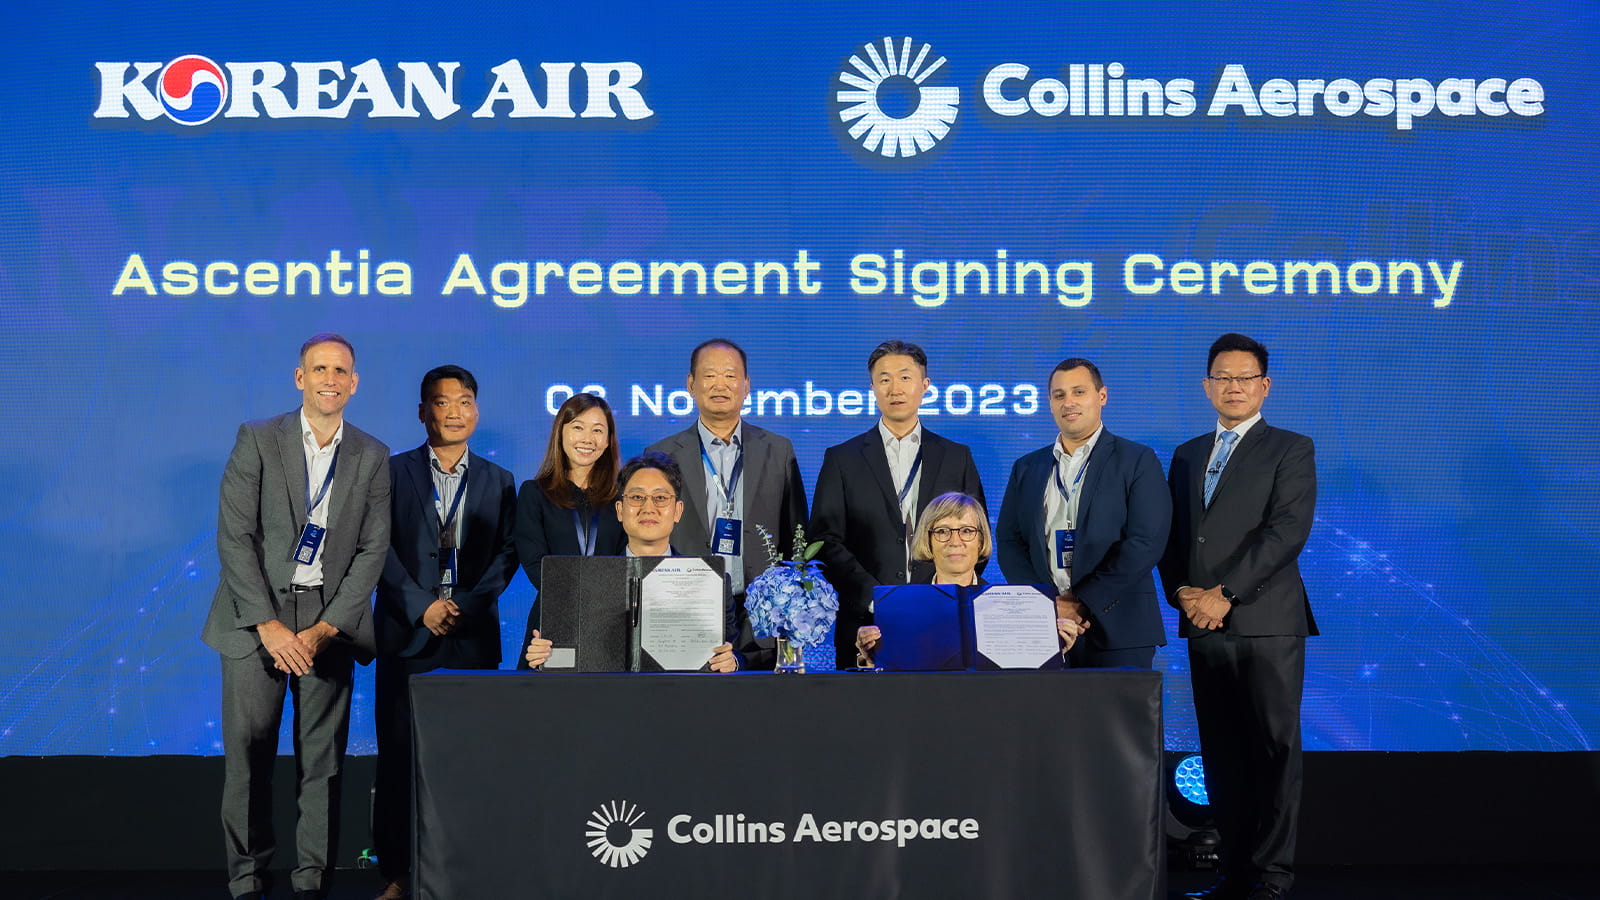 Jonghoon Oh, Korean Air, and Clotilde Enel-Rehel, Collins Aerospace, signed the agreement to equip Korean Air’s Boeing 787 fleet with Ascentia® on November 8th in Chiang Mai, Thailand.